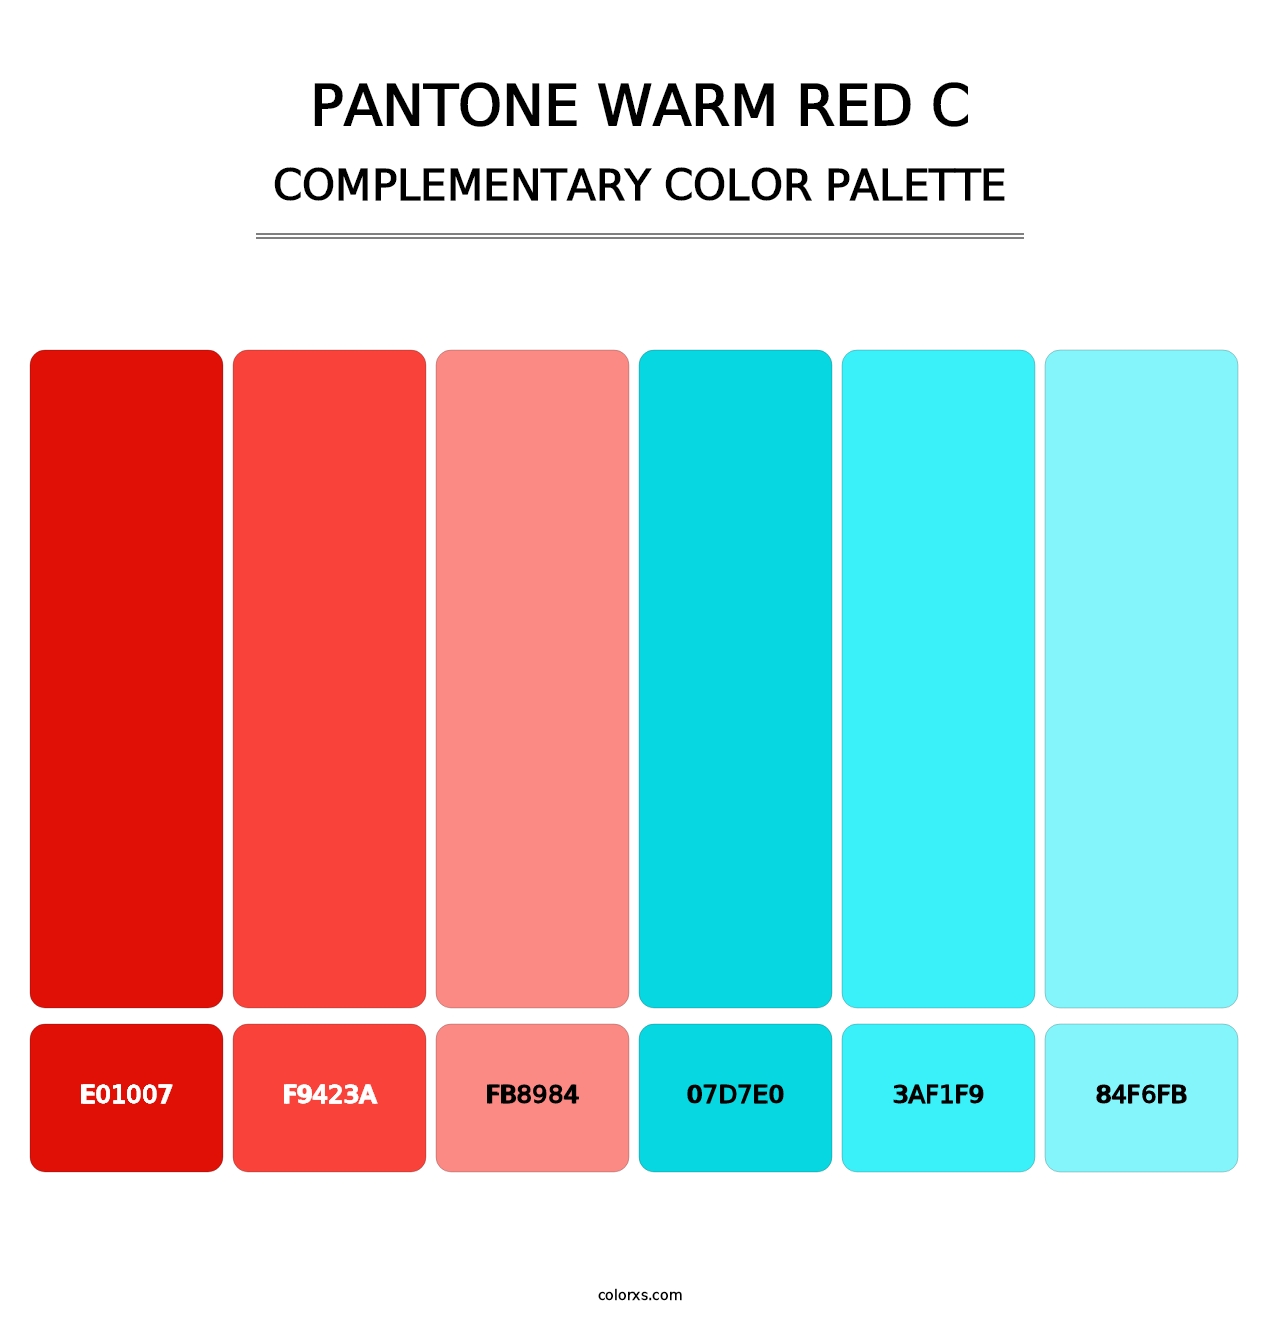 PANTONE Warm Red C - Complementary Color Palette